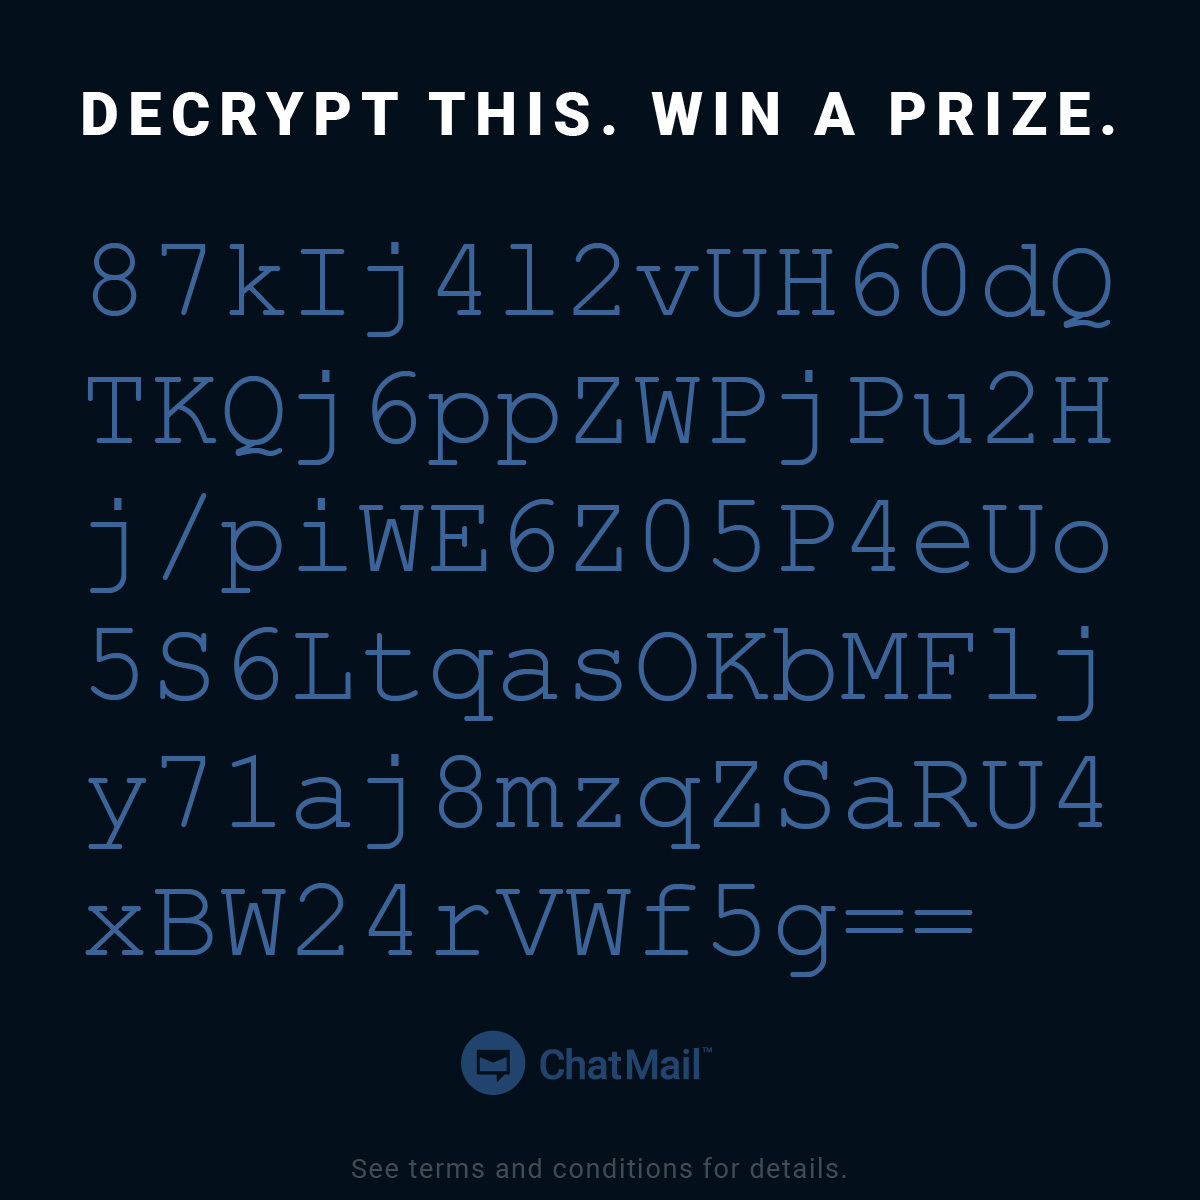 Win a ChatMail shirt by decrypting our message.